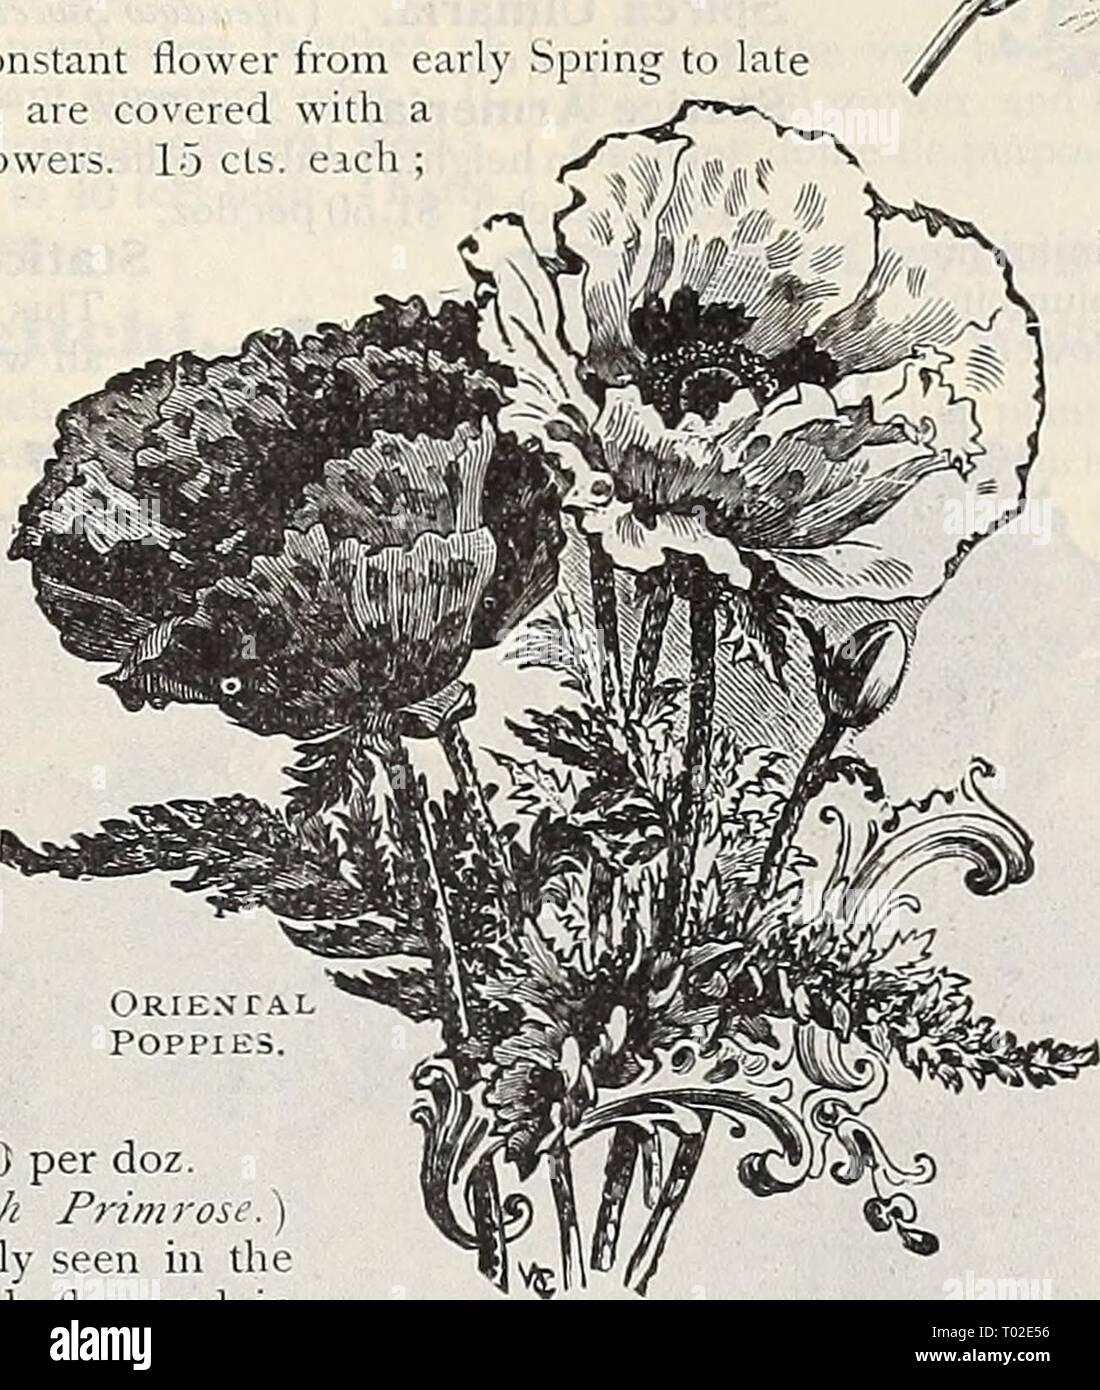 Dreer's garden calendar : 1899 . dreersgardencale1899henr Year: 1899  HARDY PERENNIAL PLANTS. i47 Phlox Divaricata Canadensis. One of our native varieties that is but rarely met with, and which has been introduced in Europe the past few years as a novelty. A plant that is certain to meet with much favor when better known, as nothing can produce such a cheerful corner in the garden in the very early Spring, frequently beginning to bloom early in April, it continues until about the middle of June, with large bright lilac-colored (lowers, which are produced on stems about 10inches high, in large  Stock Photo